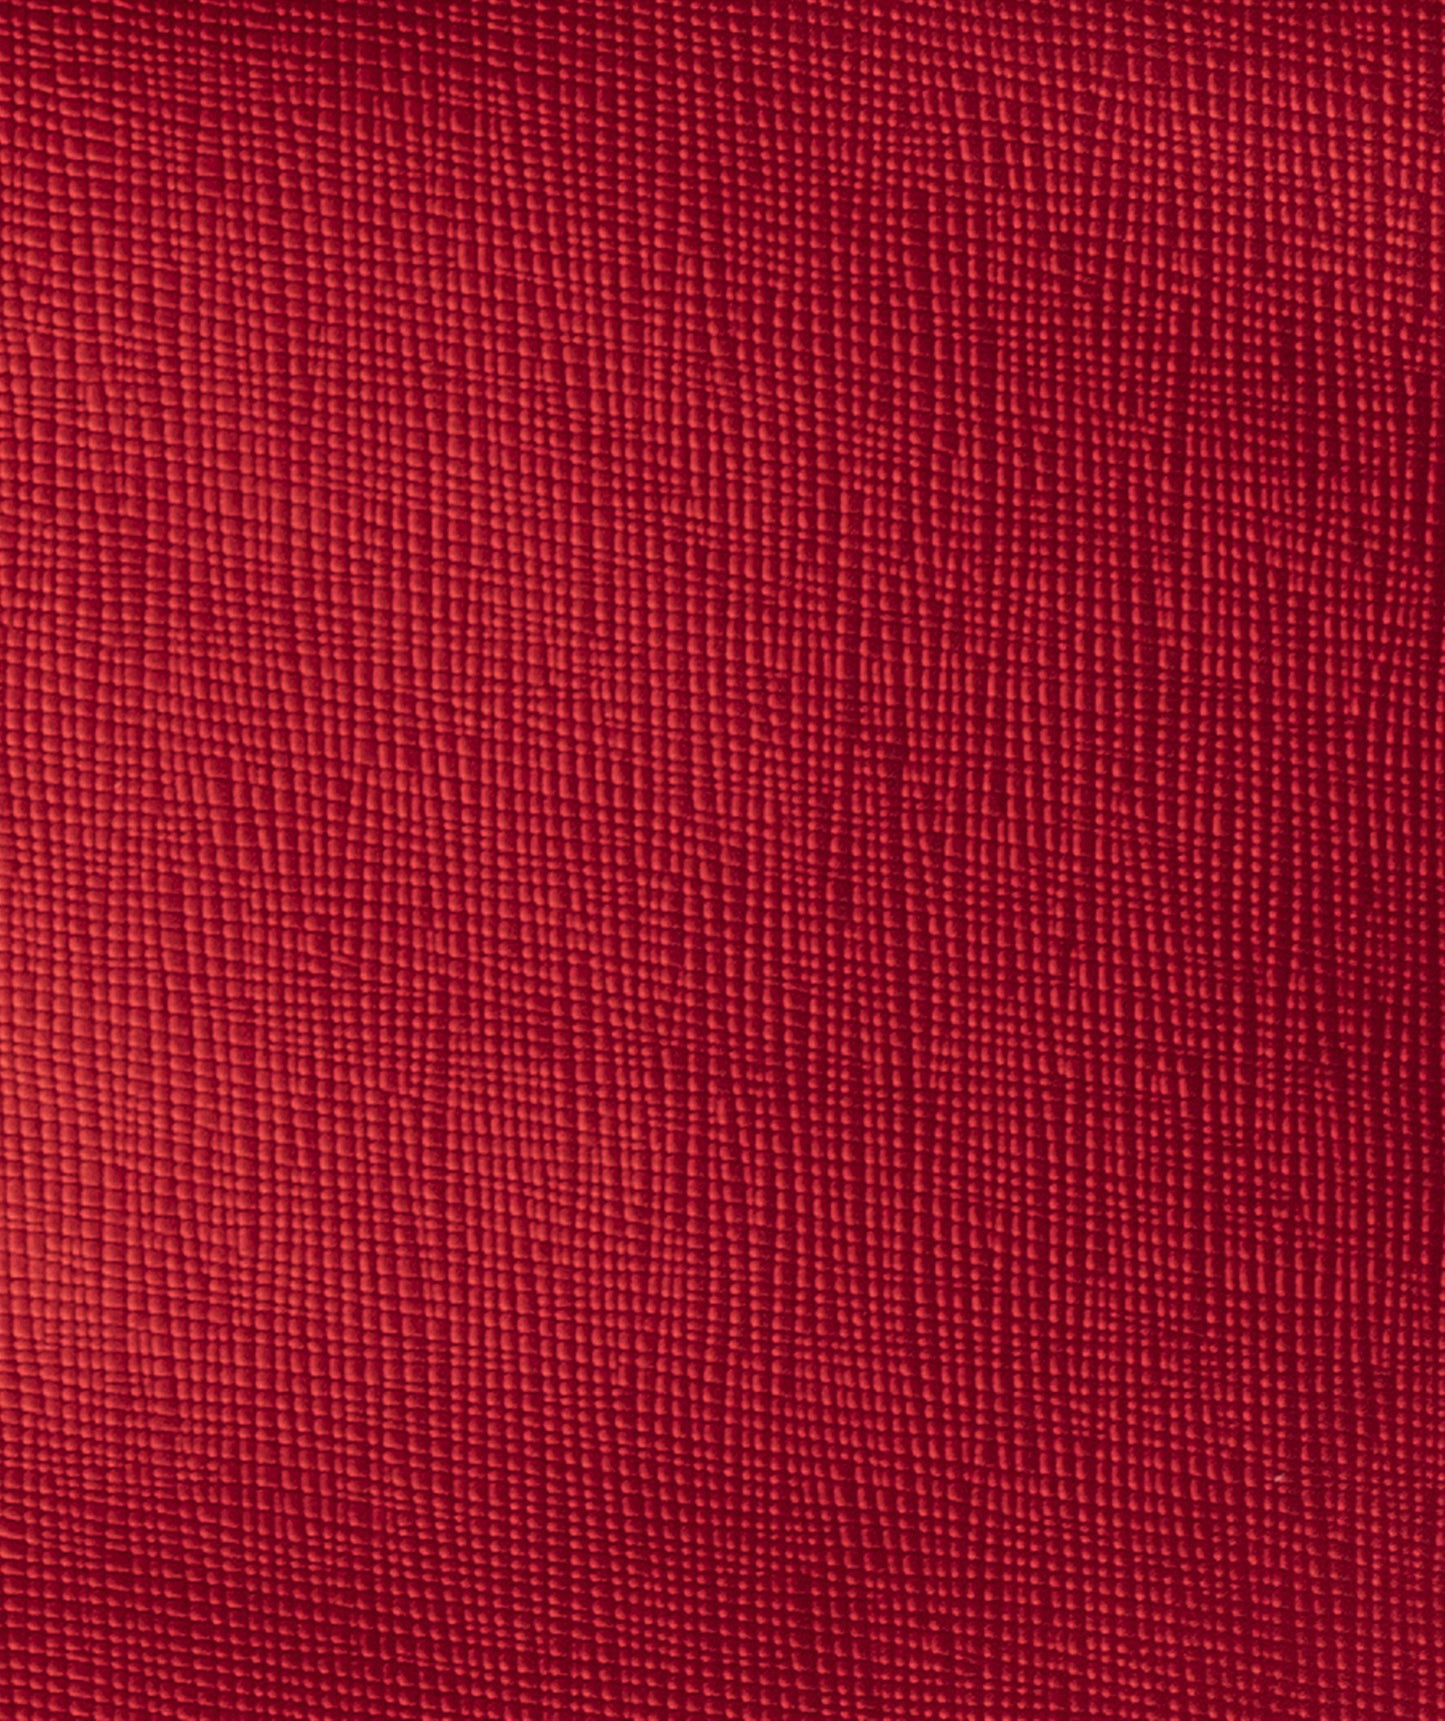 Embossed Cross Grain Wrapping Paper Roll Red